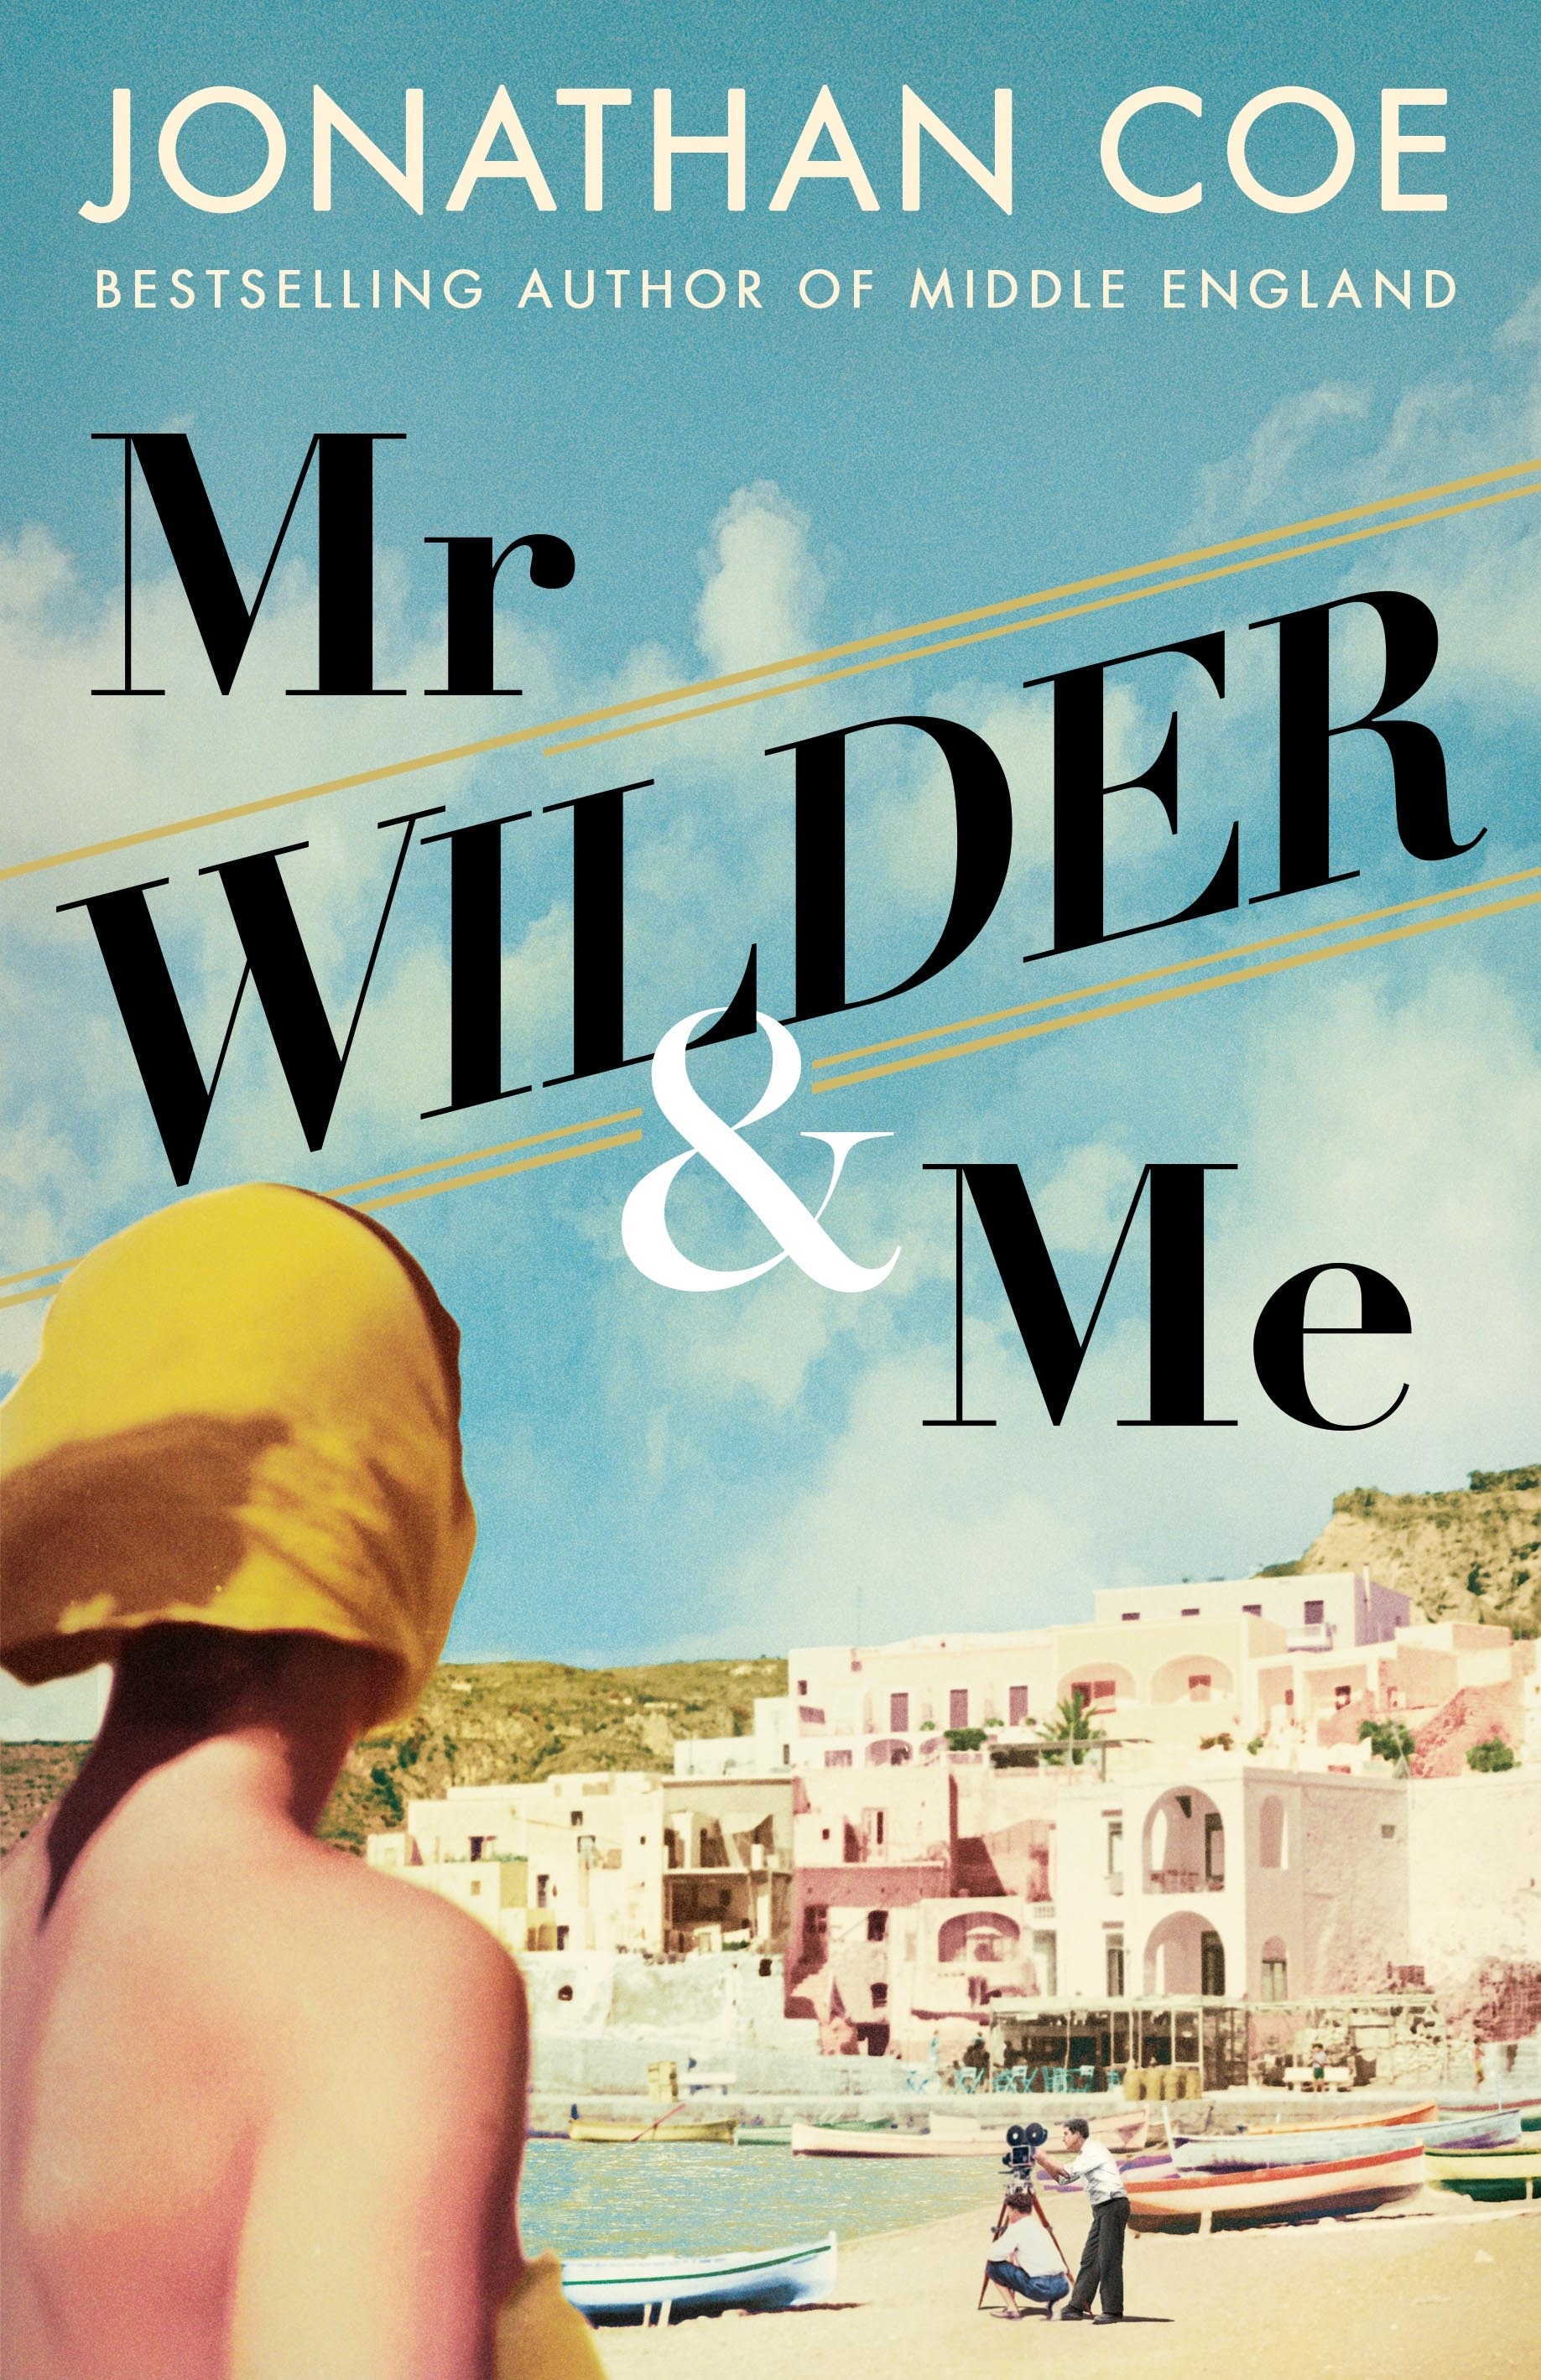 Book “Mr Wilder and Me” by Jonathan Coe — November 5, 2020